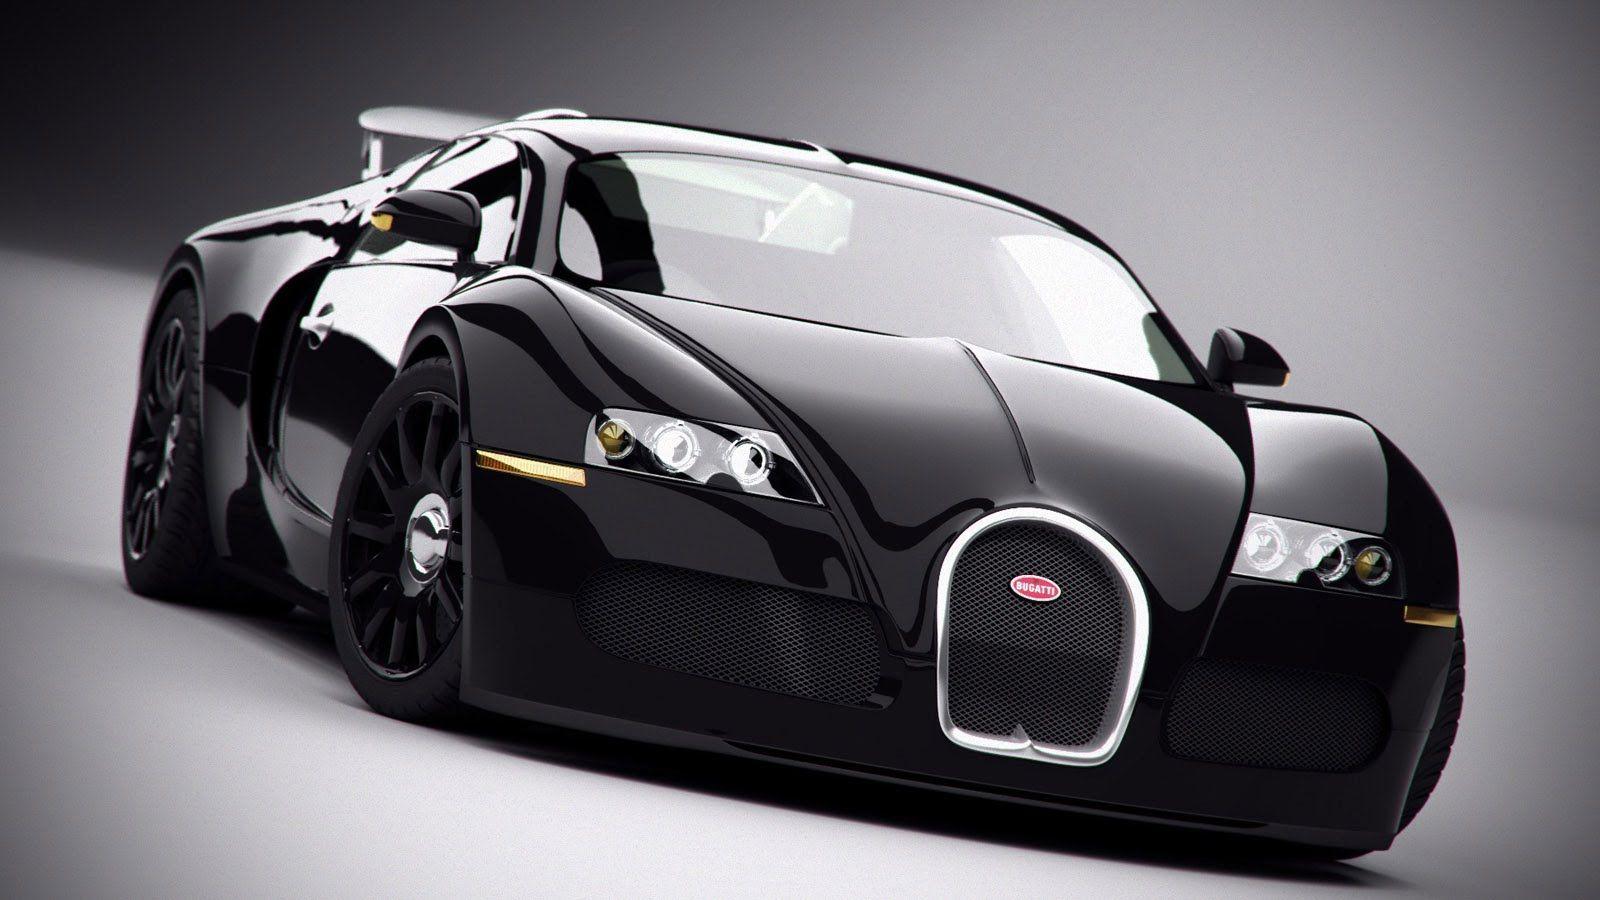 Free download Car Wallpaper Bugatti Wallpapers Download HD Wallpapers and  1008x630 for your Desktop Mobile  Tablet  Explore 30 Bugatti Car HD  Wallpapers  Bugatti Veyron Hd Wallpaper Bugatti Veyron Wallpaper